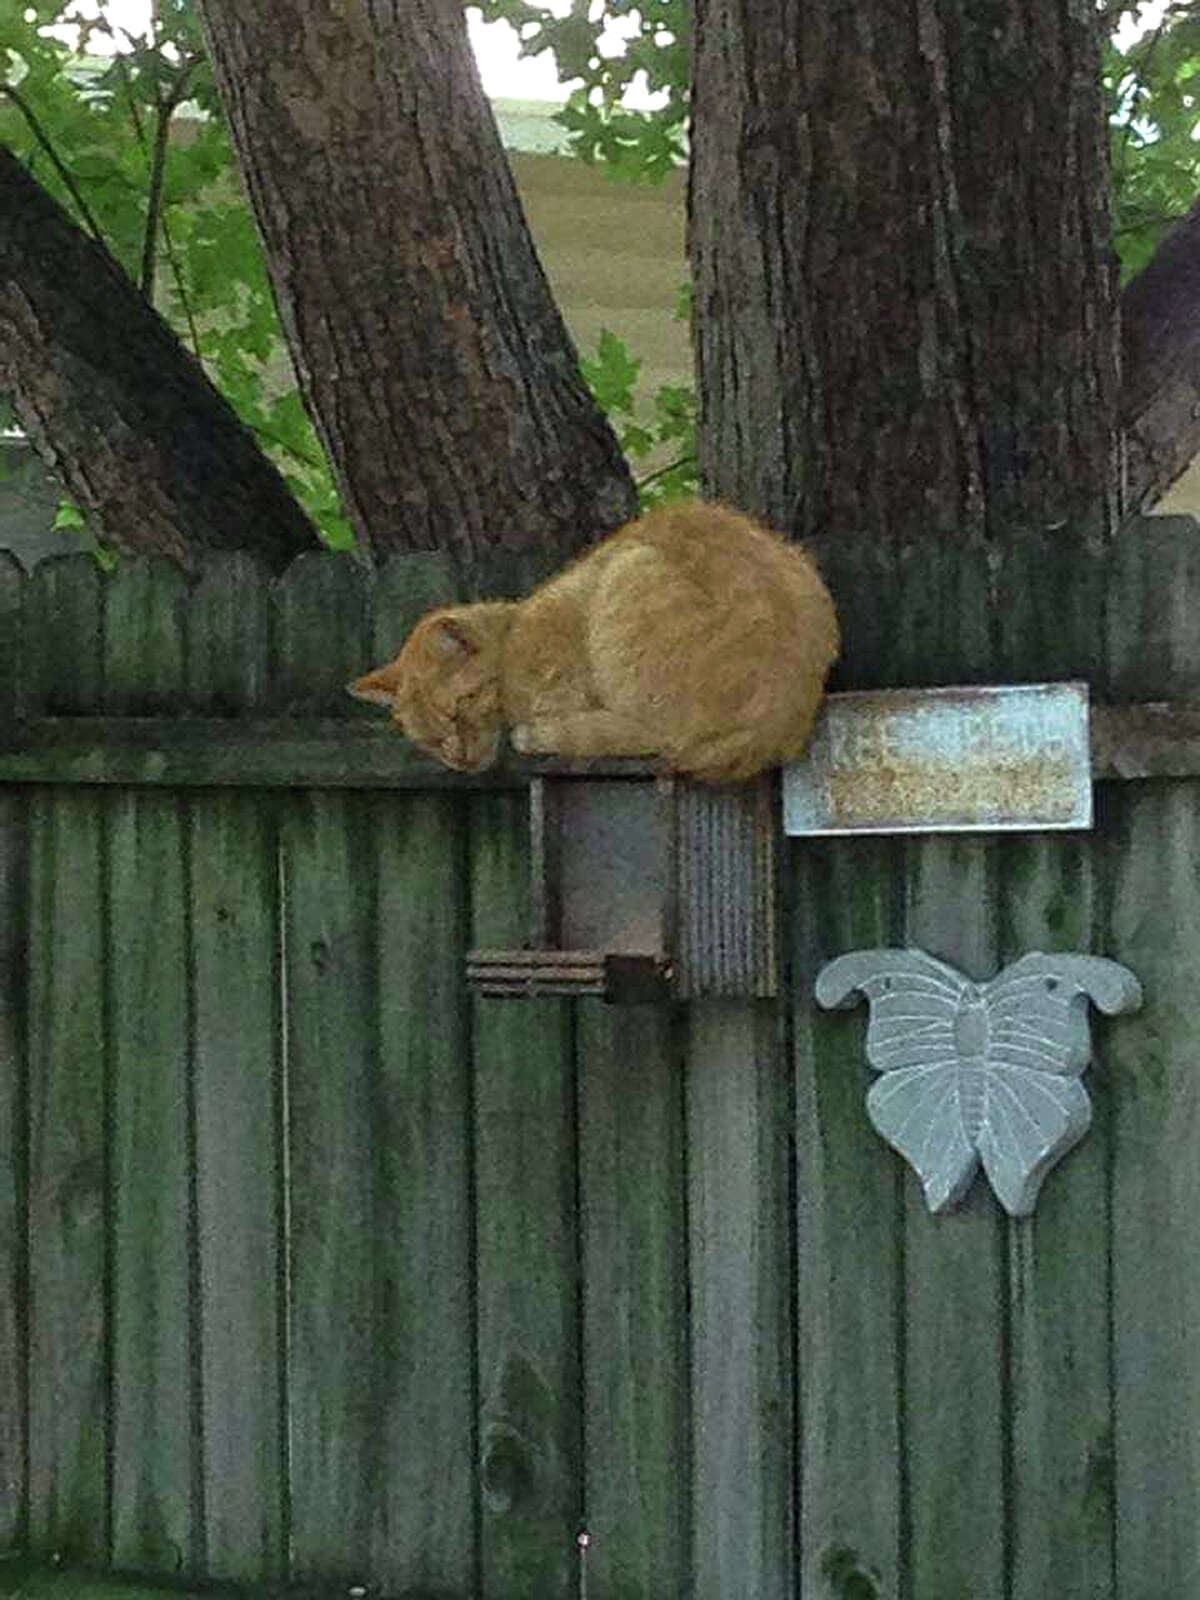 Simon the cat tries to keep squirrels away by lying on top of their feeders.